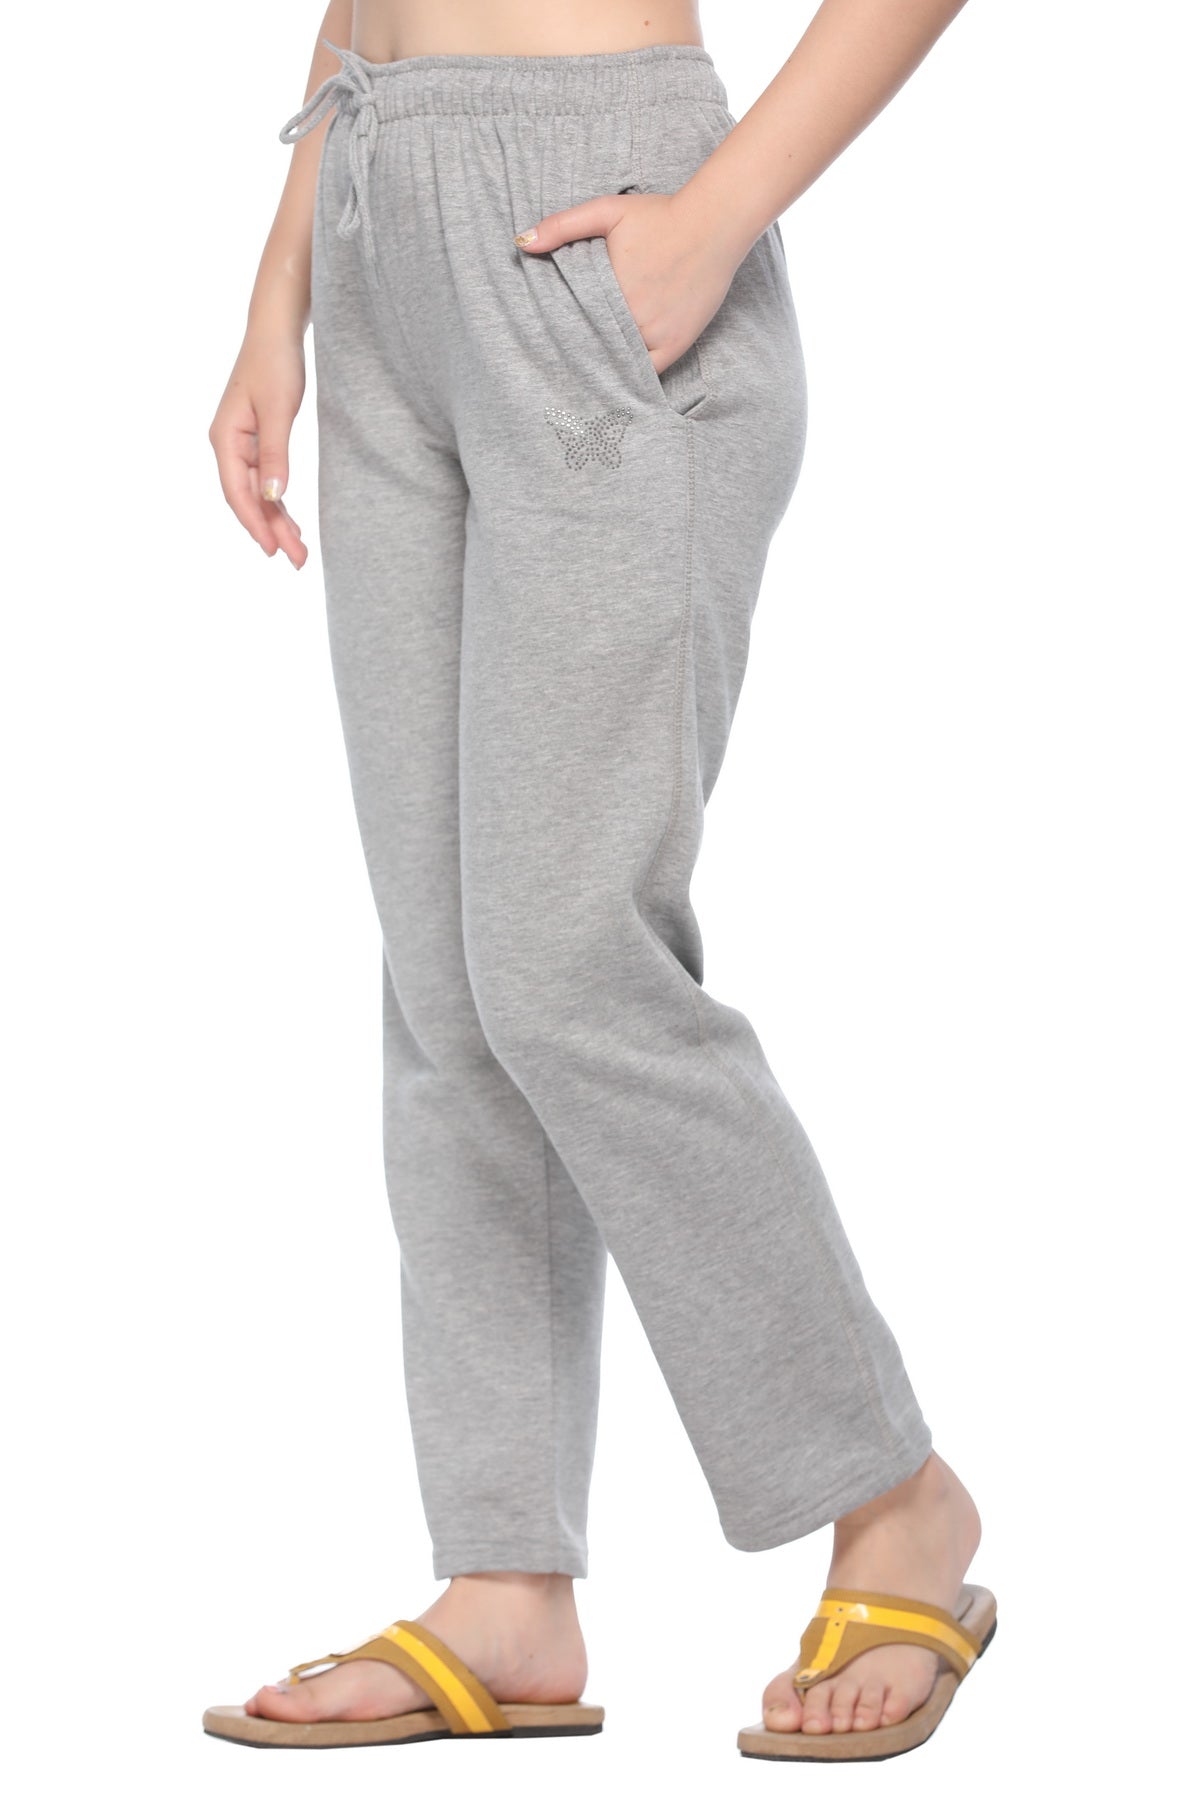 FRENCH FLEXIOUS Solid Women Blue Track Pants  Buy FRENCH FLEXIOUS Solid  Women Blue Track Pants Online at Best Prices in India  Flipkartcom